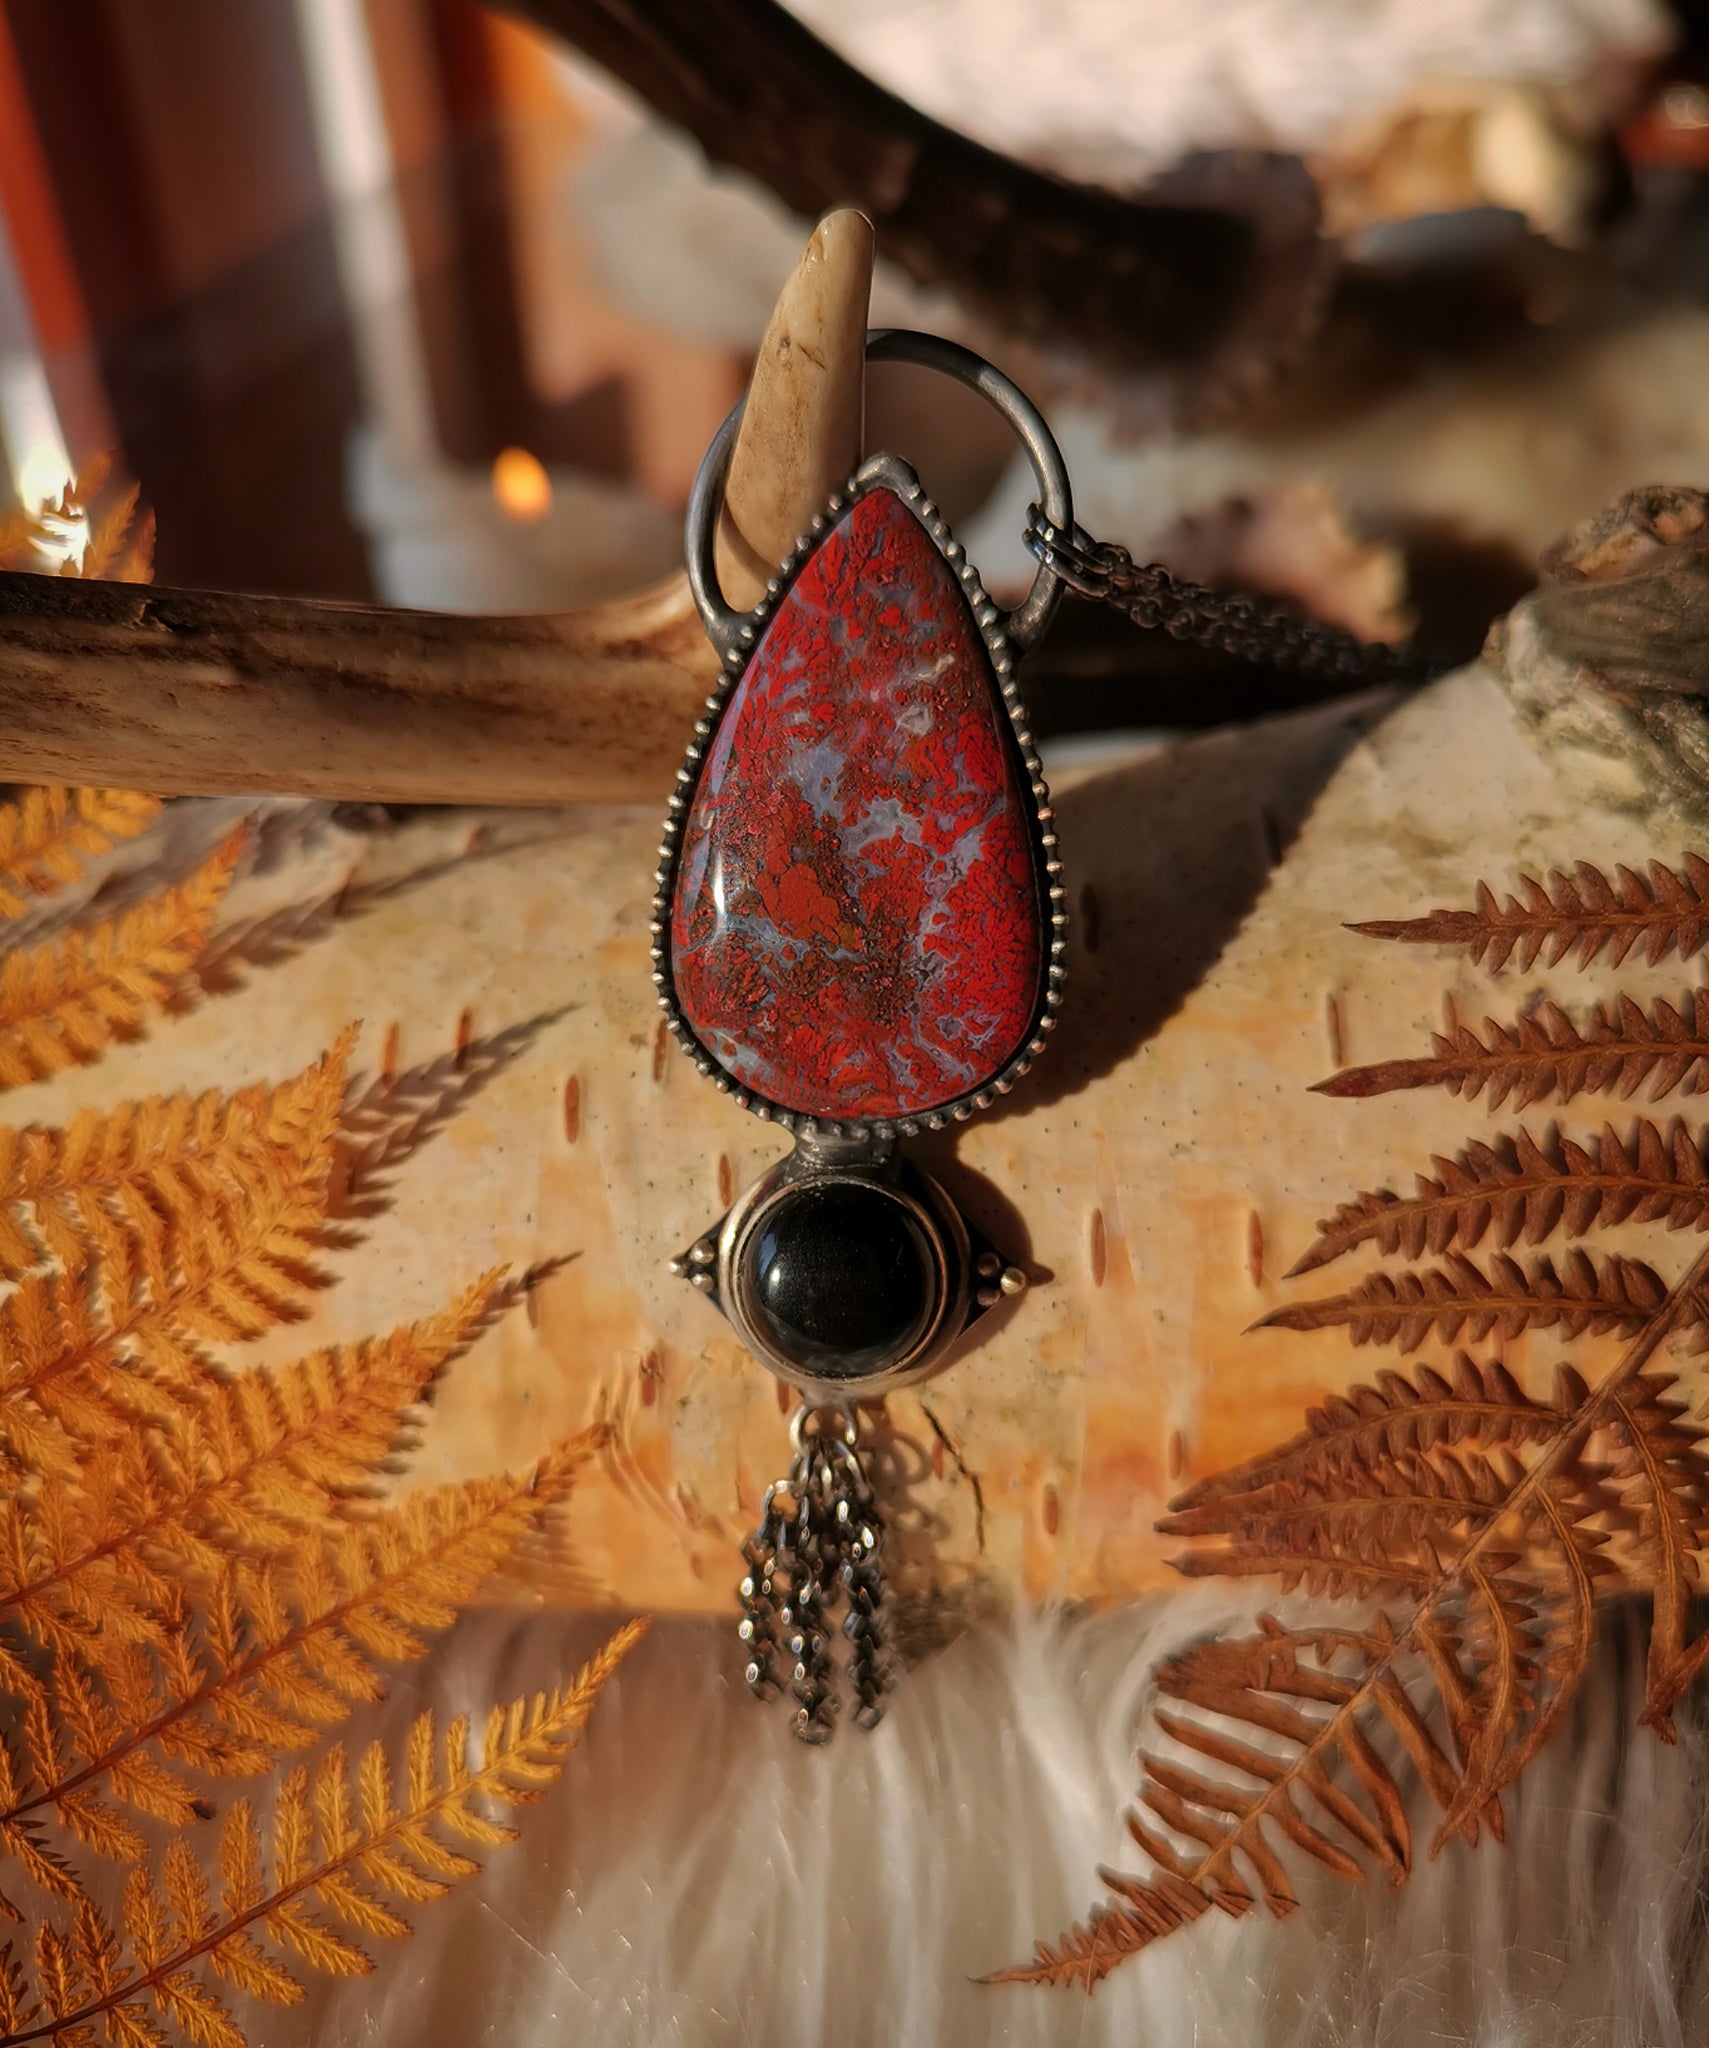 Red moss agate and black obsidian necklace